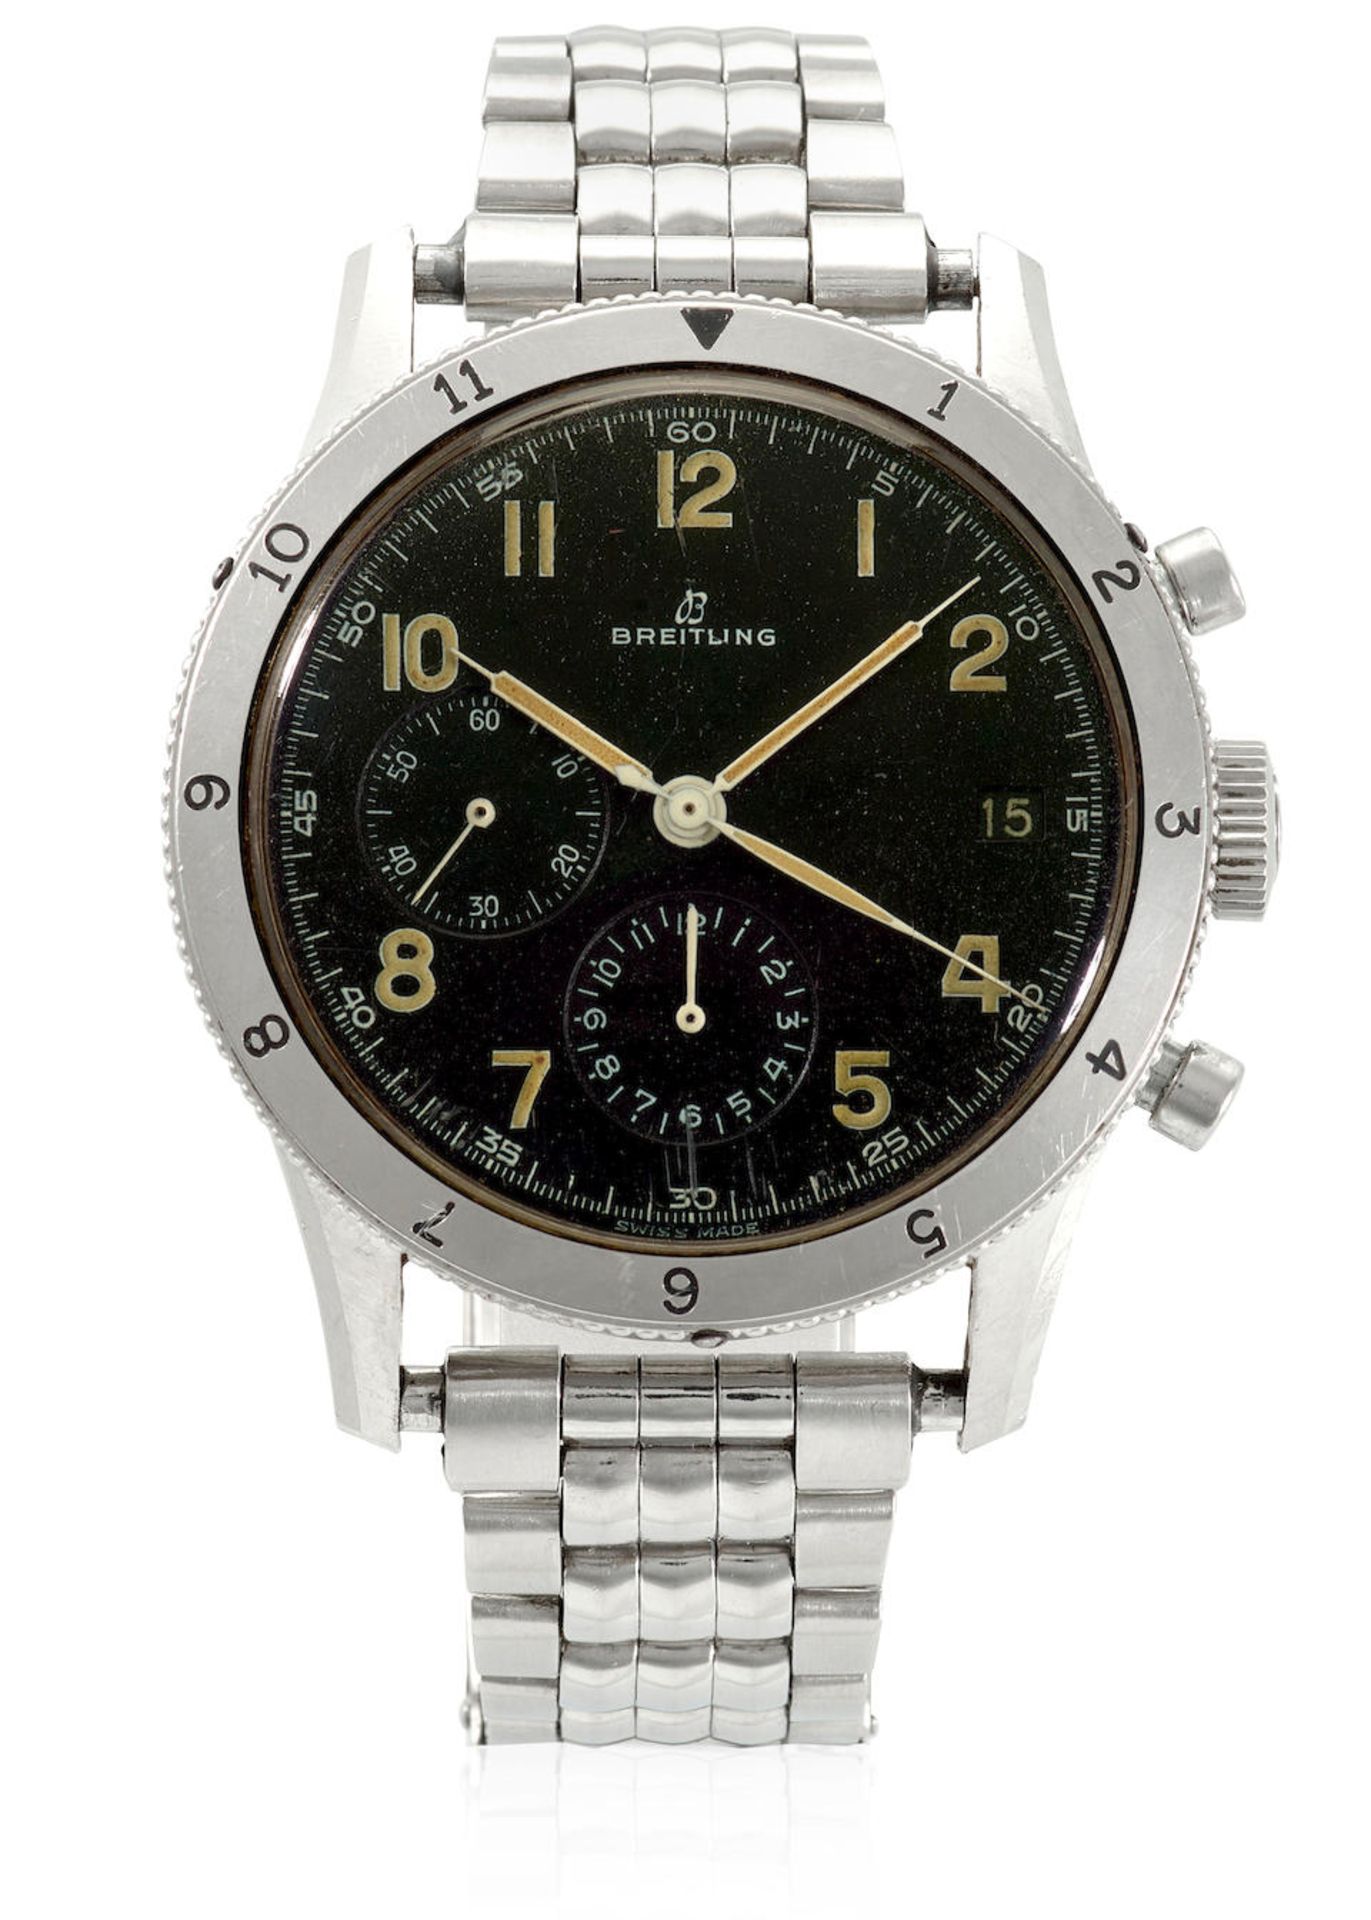 BREITLING. A STAINLESS STEEL MANUAL WIND CHRONOGRAPH BRACELET WATCH Co-Pilot, Ref: 765 AVI, c. 1...